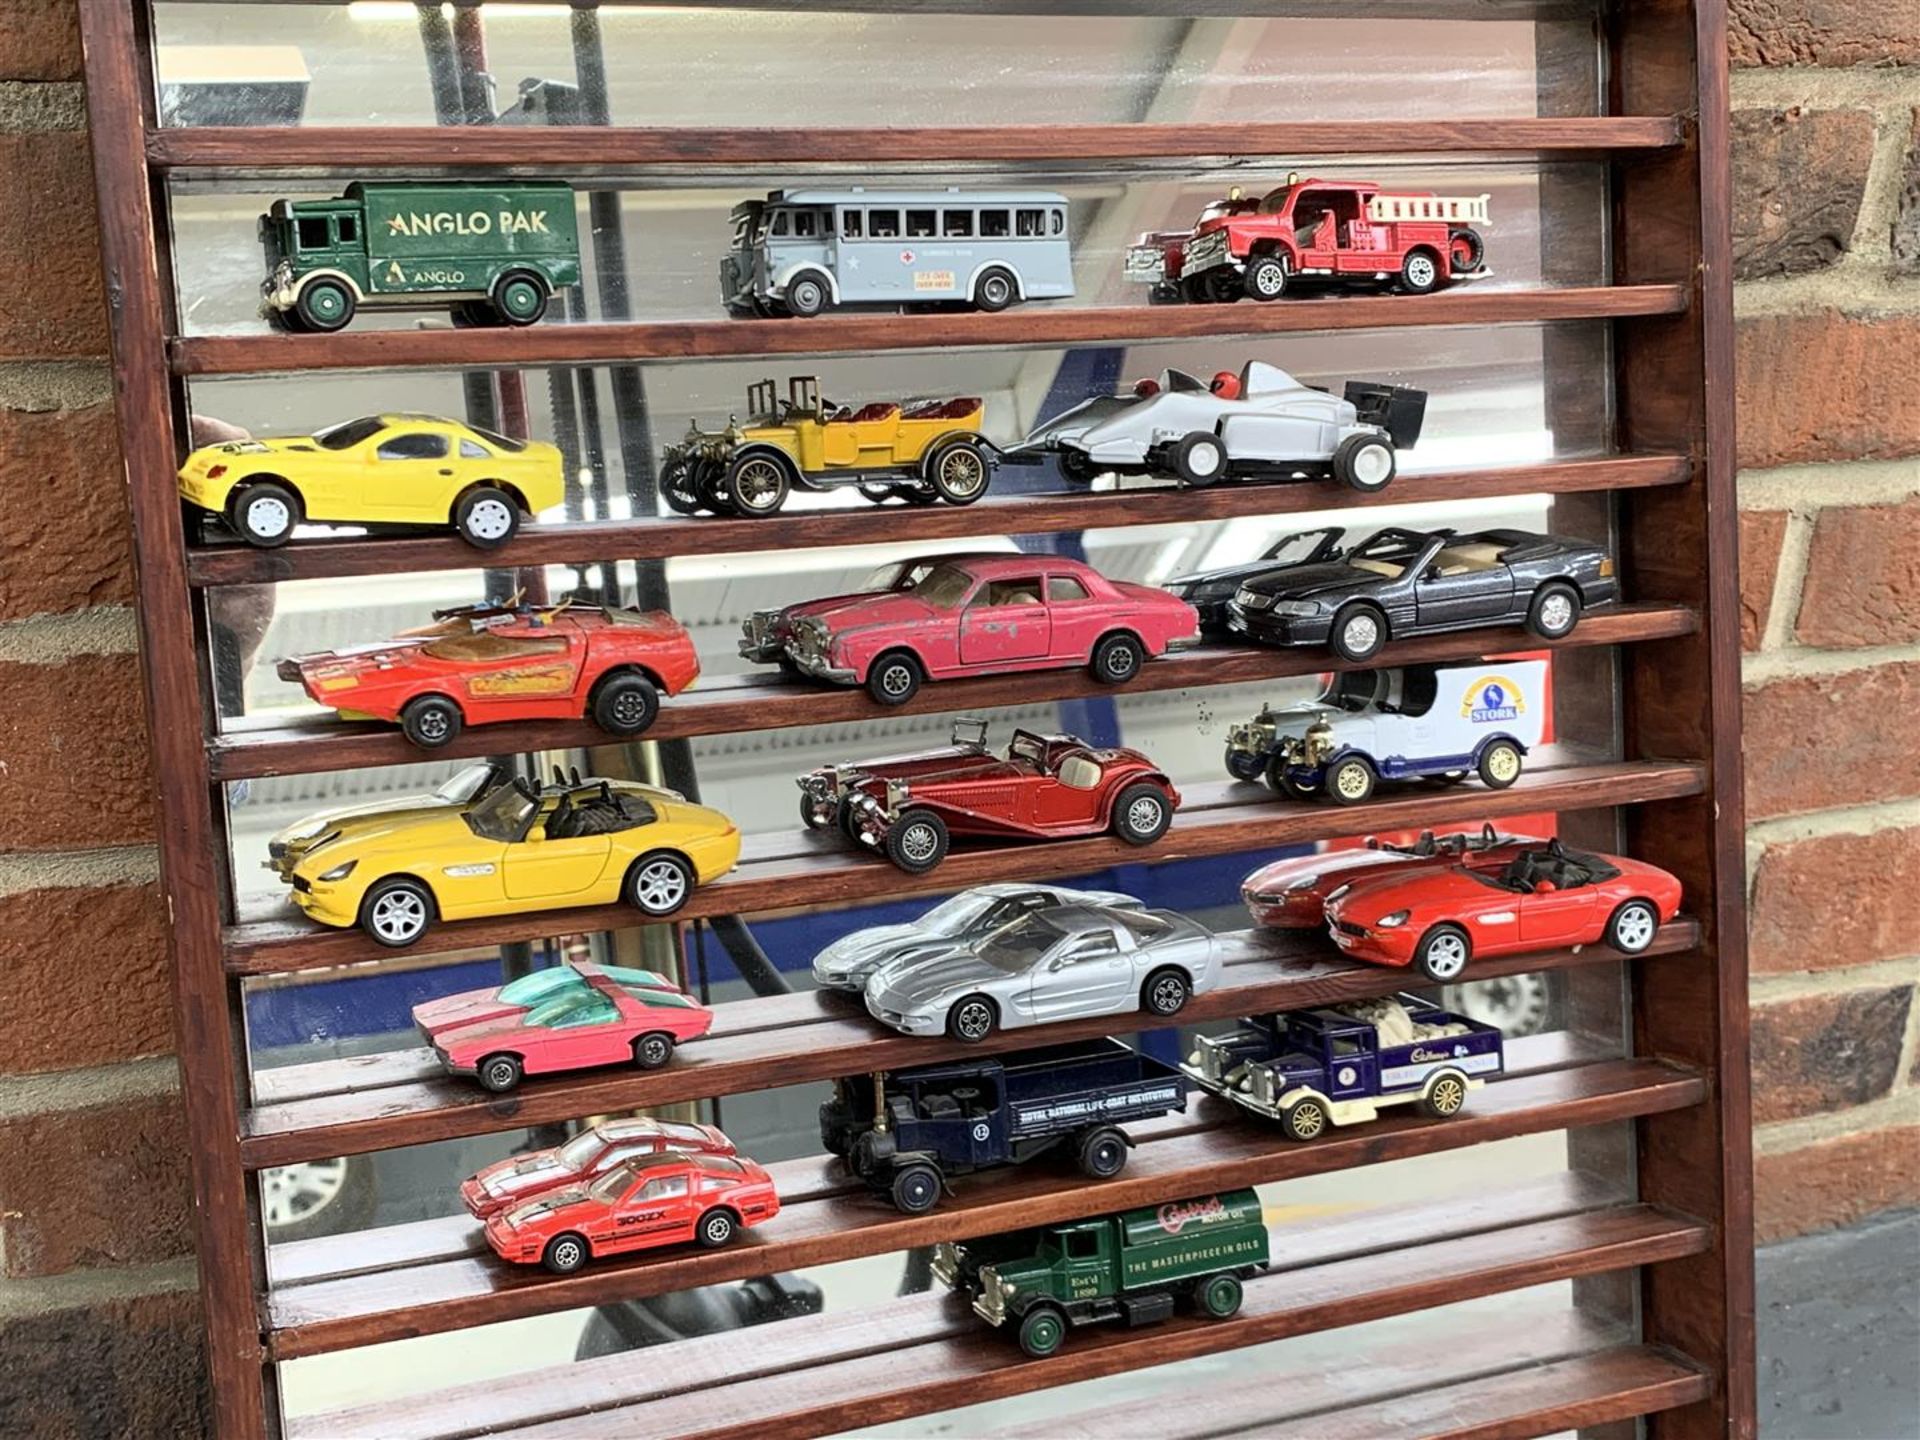 Shelf Of Play Worn Die Cast Toy Cars - Image 2 of 5